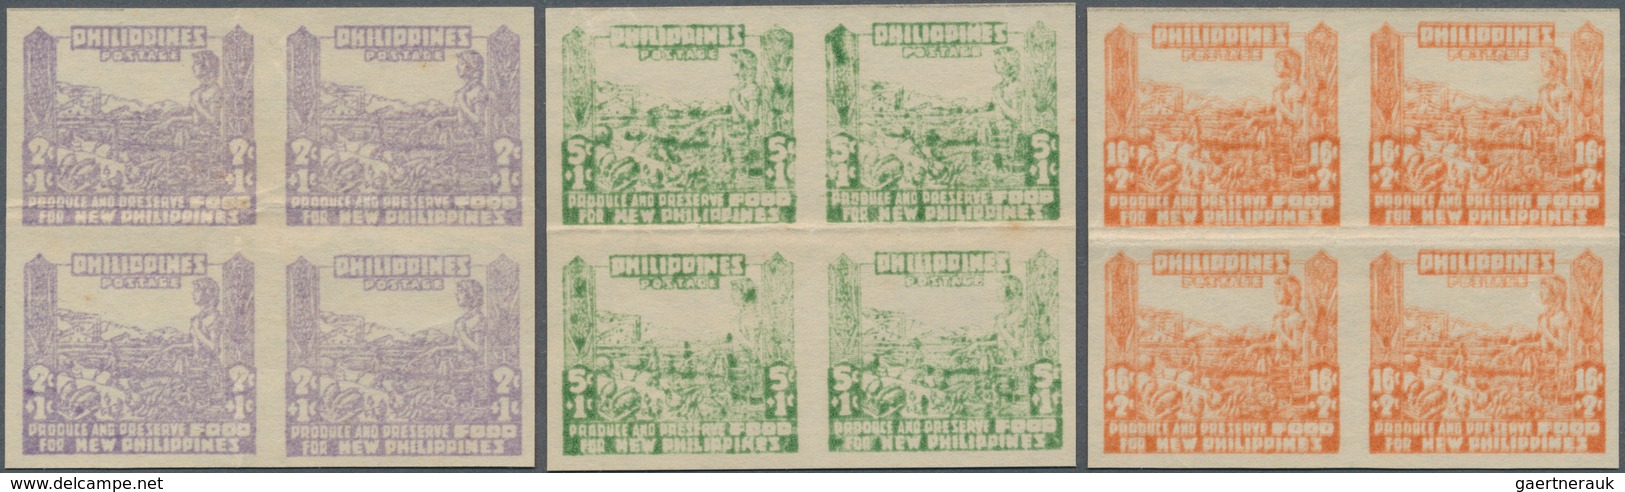 Philippinen: 1942, Semi-Postals, Three Values Complete Each As Imperforate Proof Block Of Four On Un - Philippines